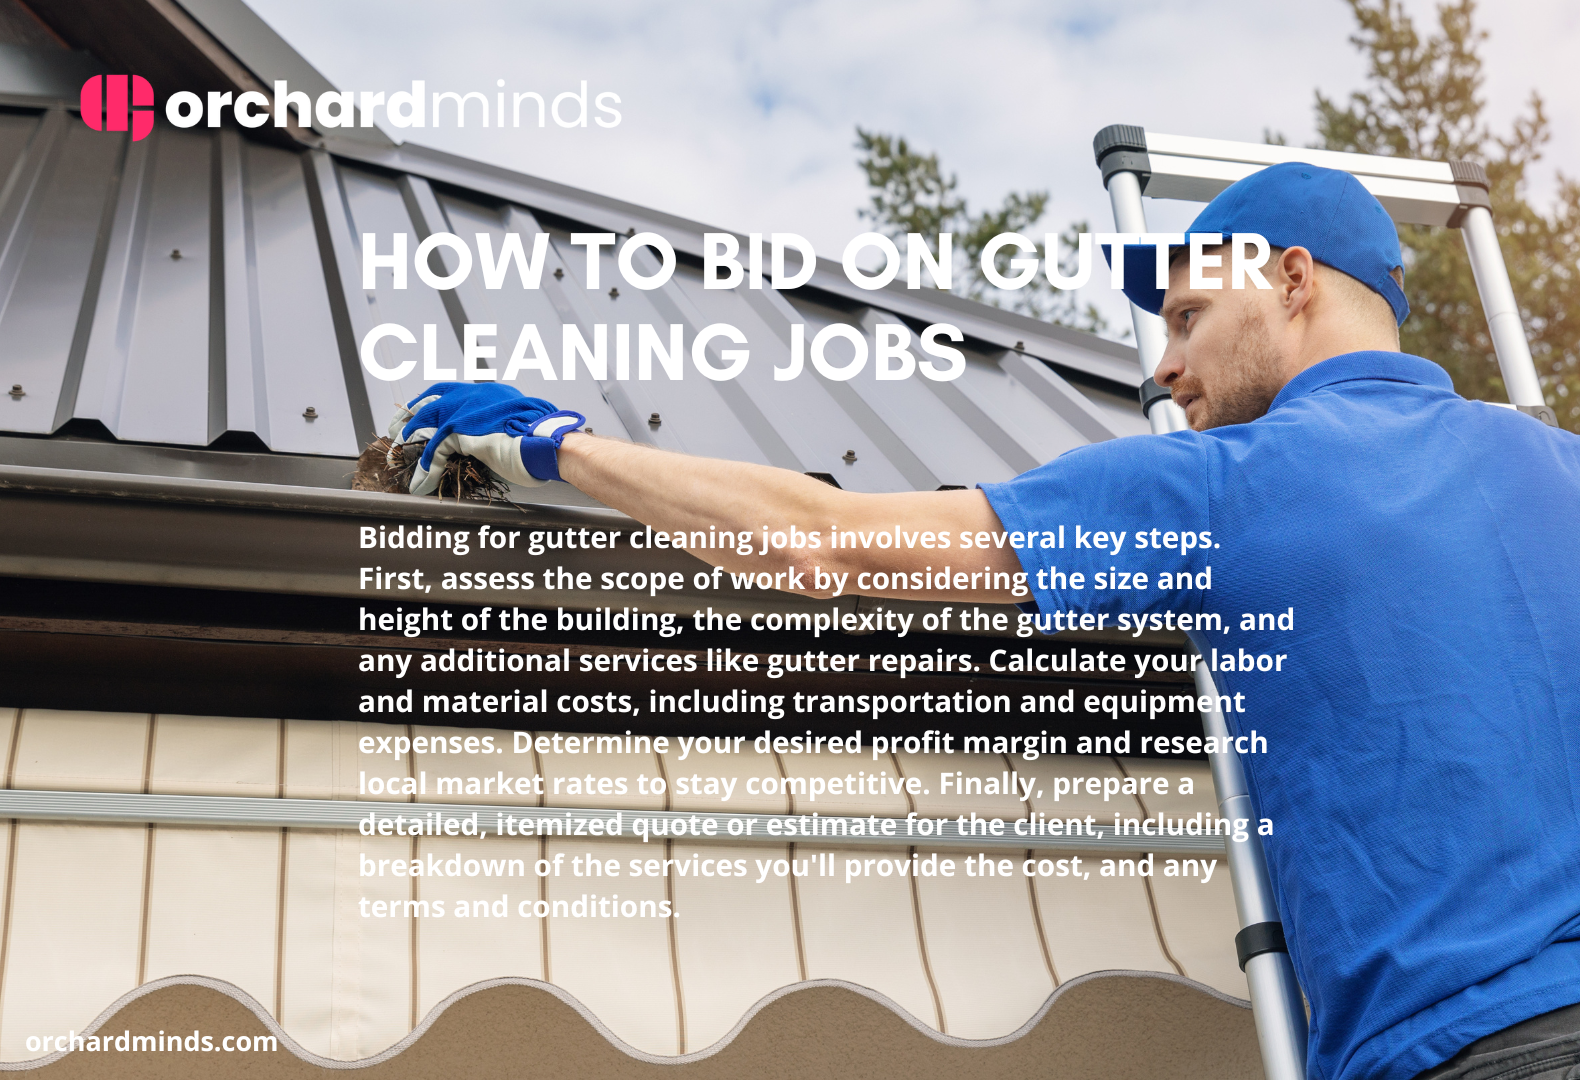 How to bid on gutter cleaning jobs